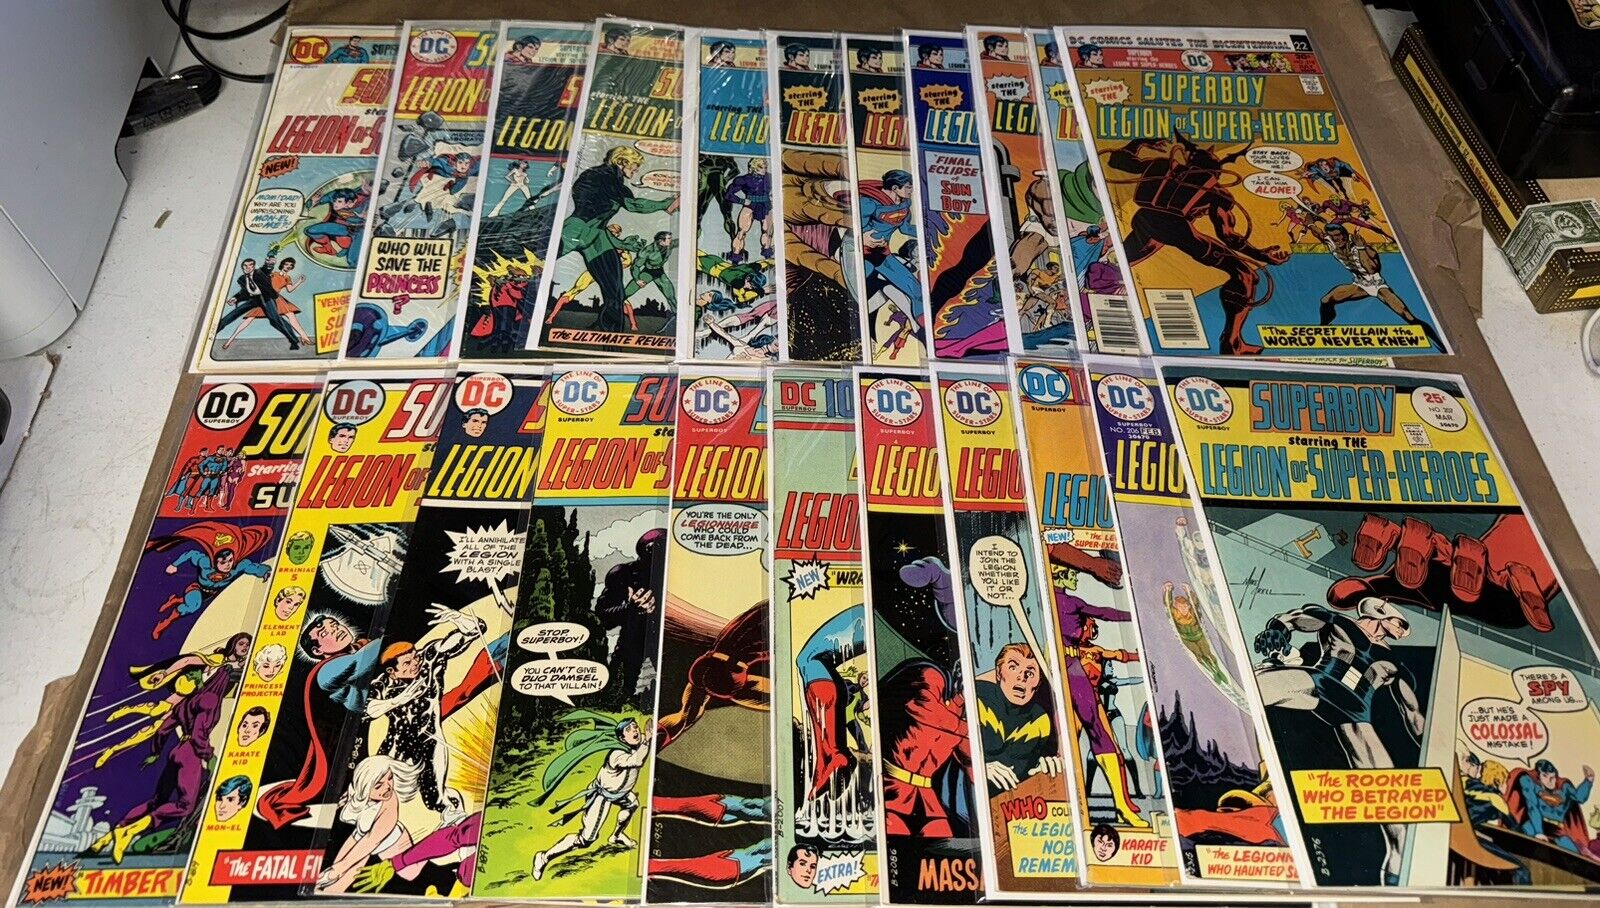 SUPERBOY AND THE LEGION OF SUPERHEROES #197-313 + Annuals Lot Of 122 Comic Books